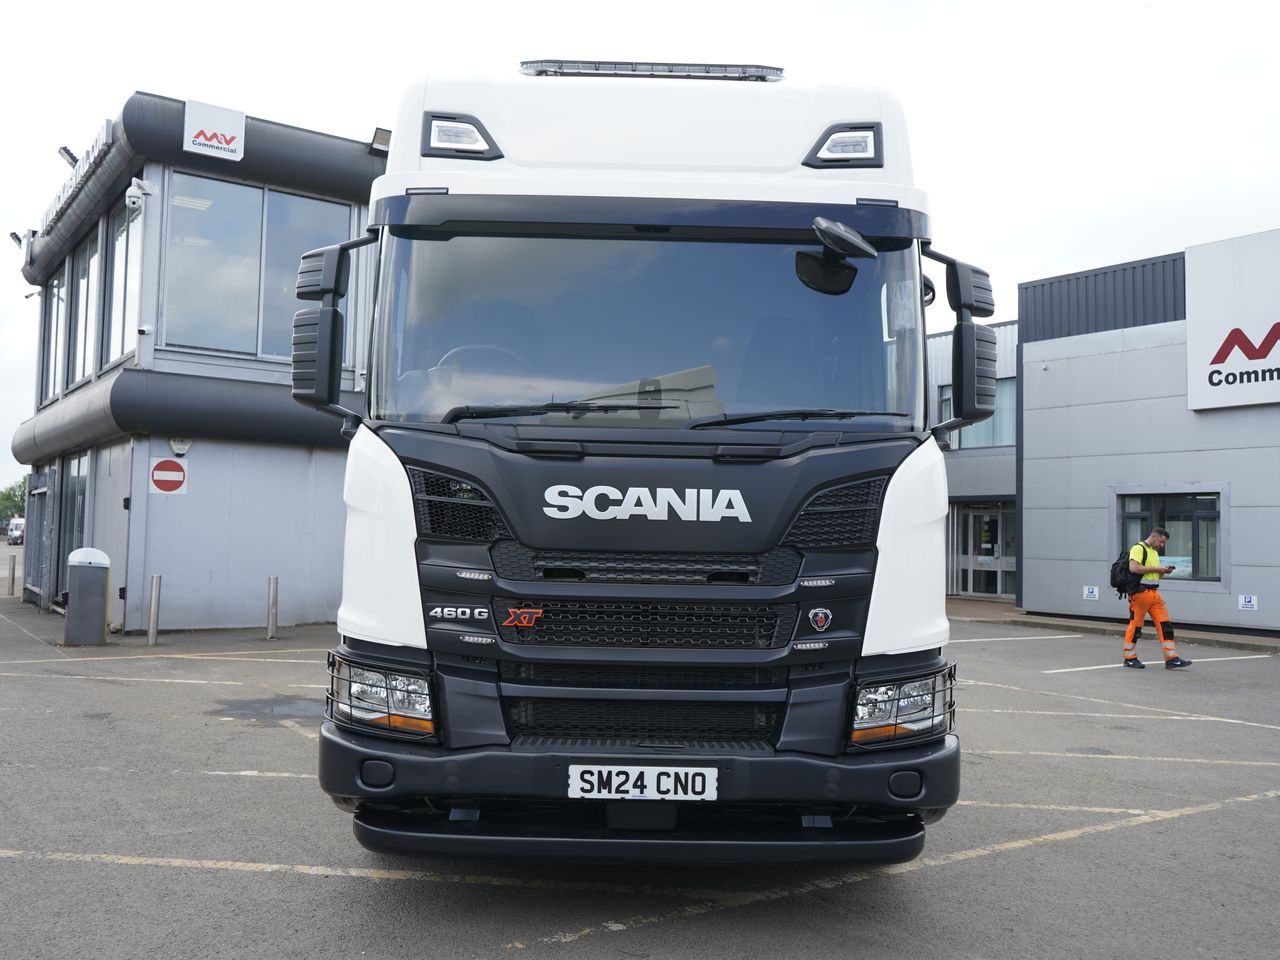 Ready to go Scania G460, Cabin Spec, 460, 32 Tonne, Highline Sleeper, Automatic, 28mm Keruing Hardwood Floor, 2 x 8.5 Tonne Front Axles, 4 x Crane Pads, Access Ladder, Bluetooth/AUX/USB Dashboard Input, , Palfinger, PK 65002 SH HIGH PERFORMANCE | for sale at MV Commercial, the UKs leading Truck, Trailers and Van supplier. (SM24CNO 286846)